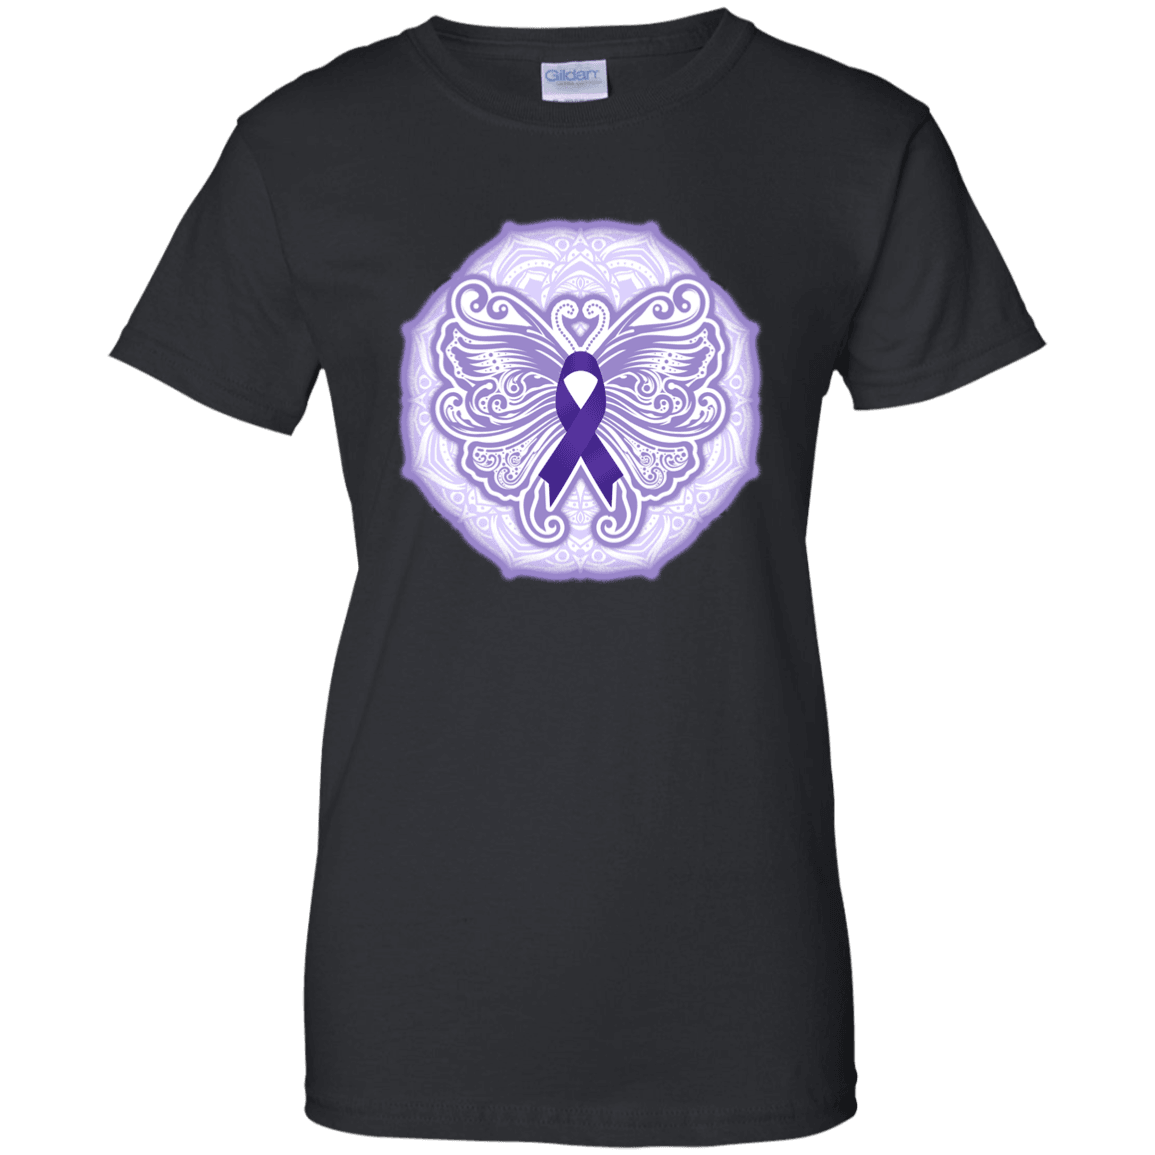 Designs by MyUtopia Shout Out:Epilepsy Awareness Butterfly Ladies' 100% Cotton T-Shirt,Black / X-Small,Ladies T-Shirts